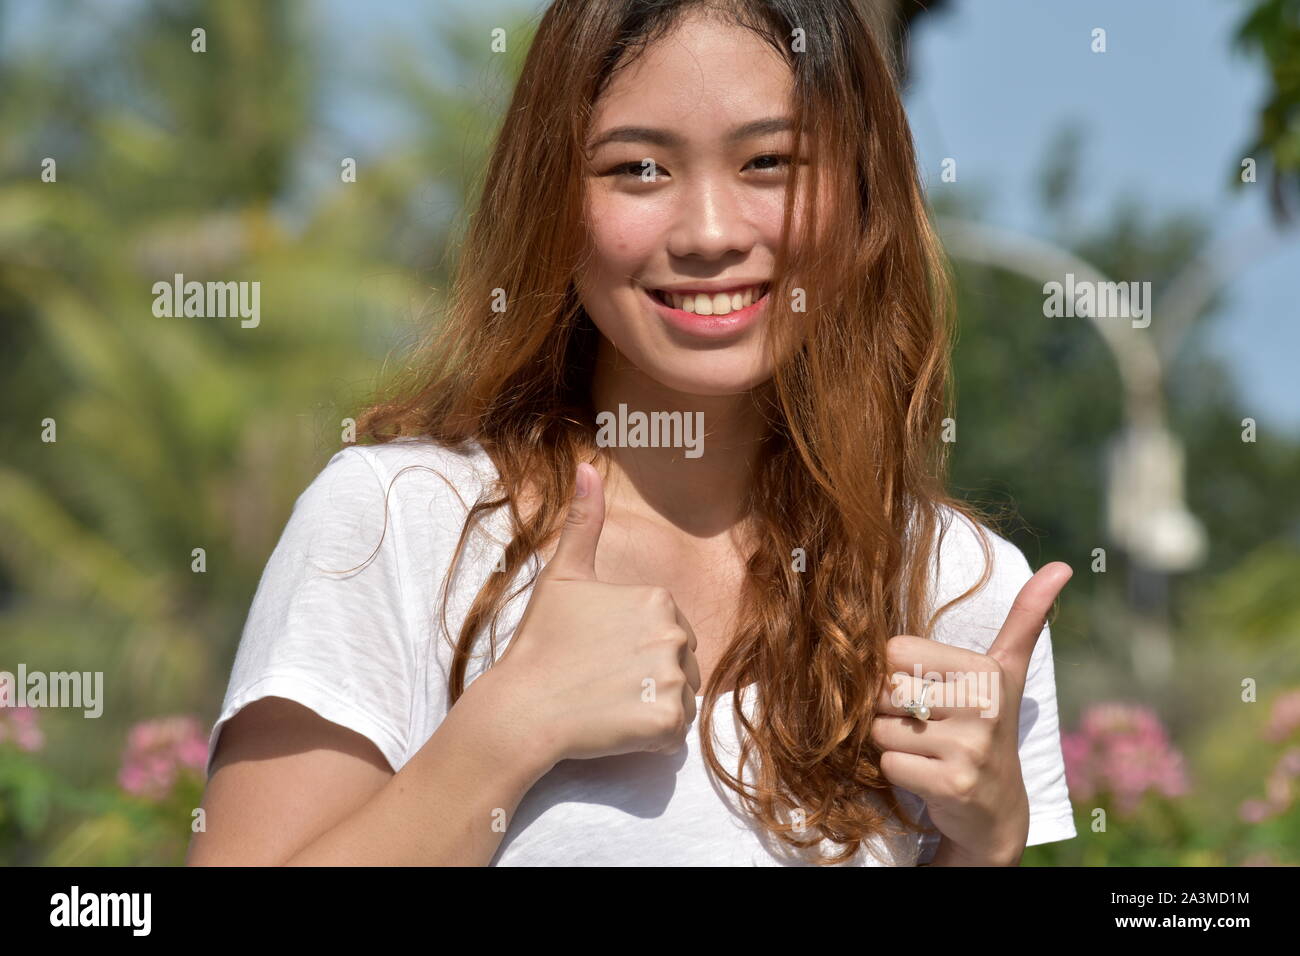 Young Female With Thumbs Up Stock Photo